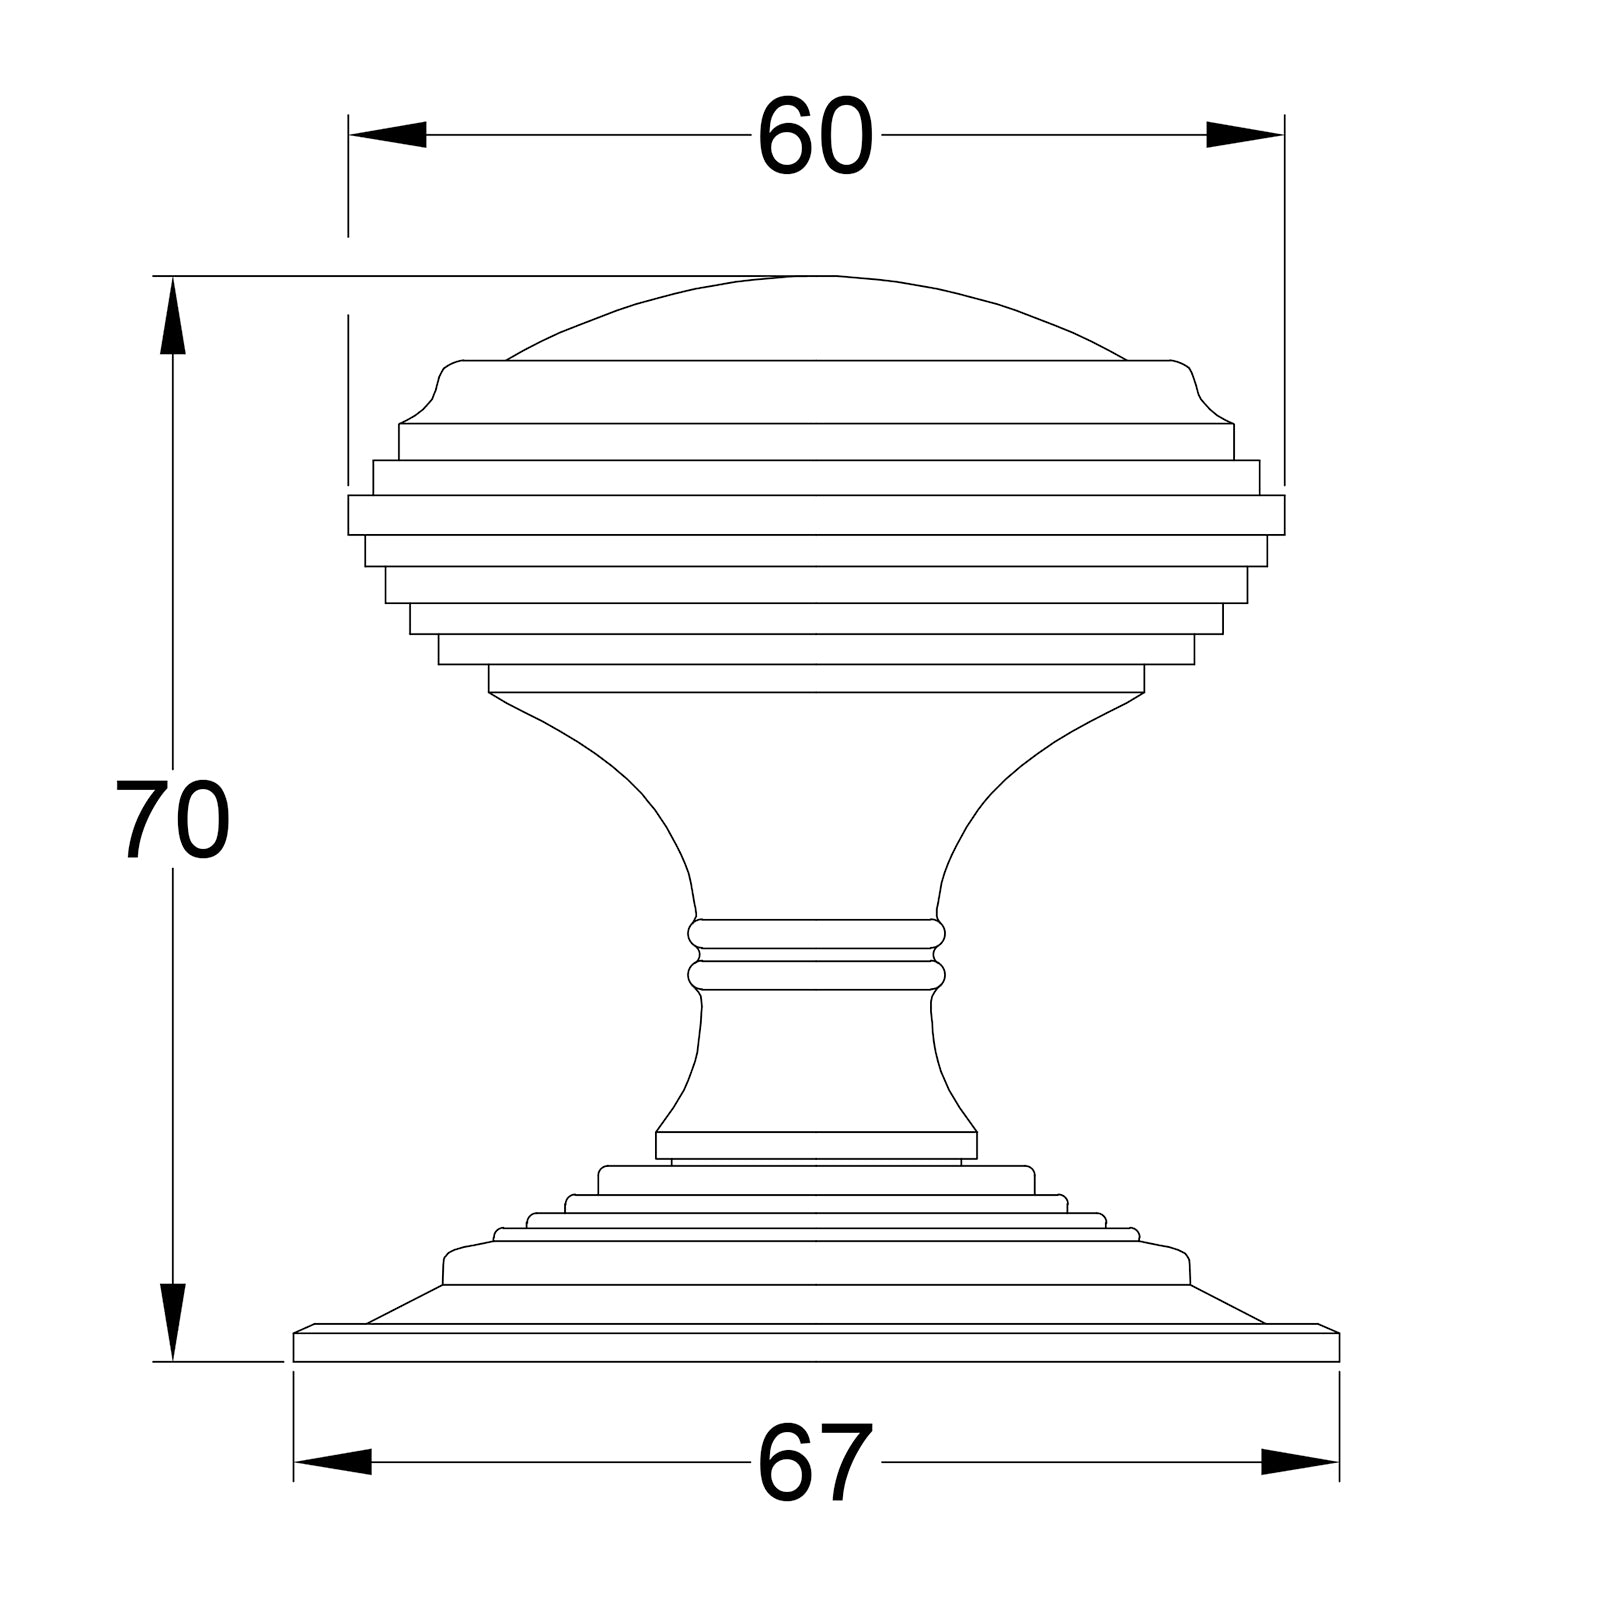 SHOW Technical Drawing of Goodrich Door Knob on Rose